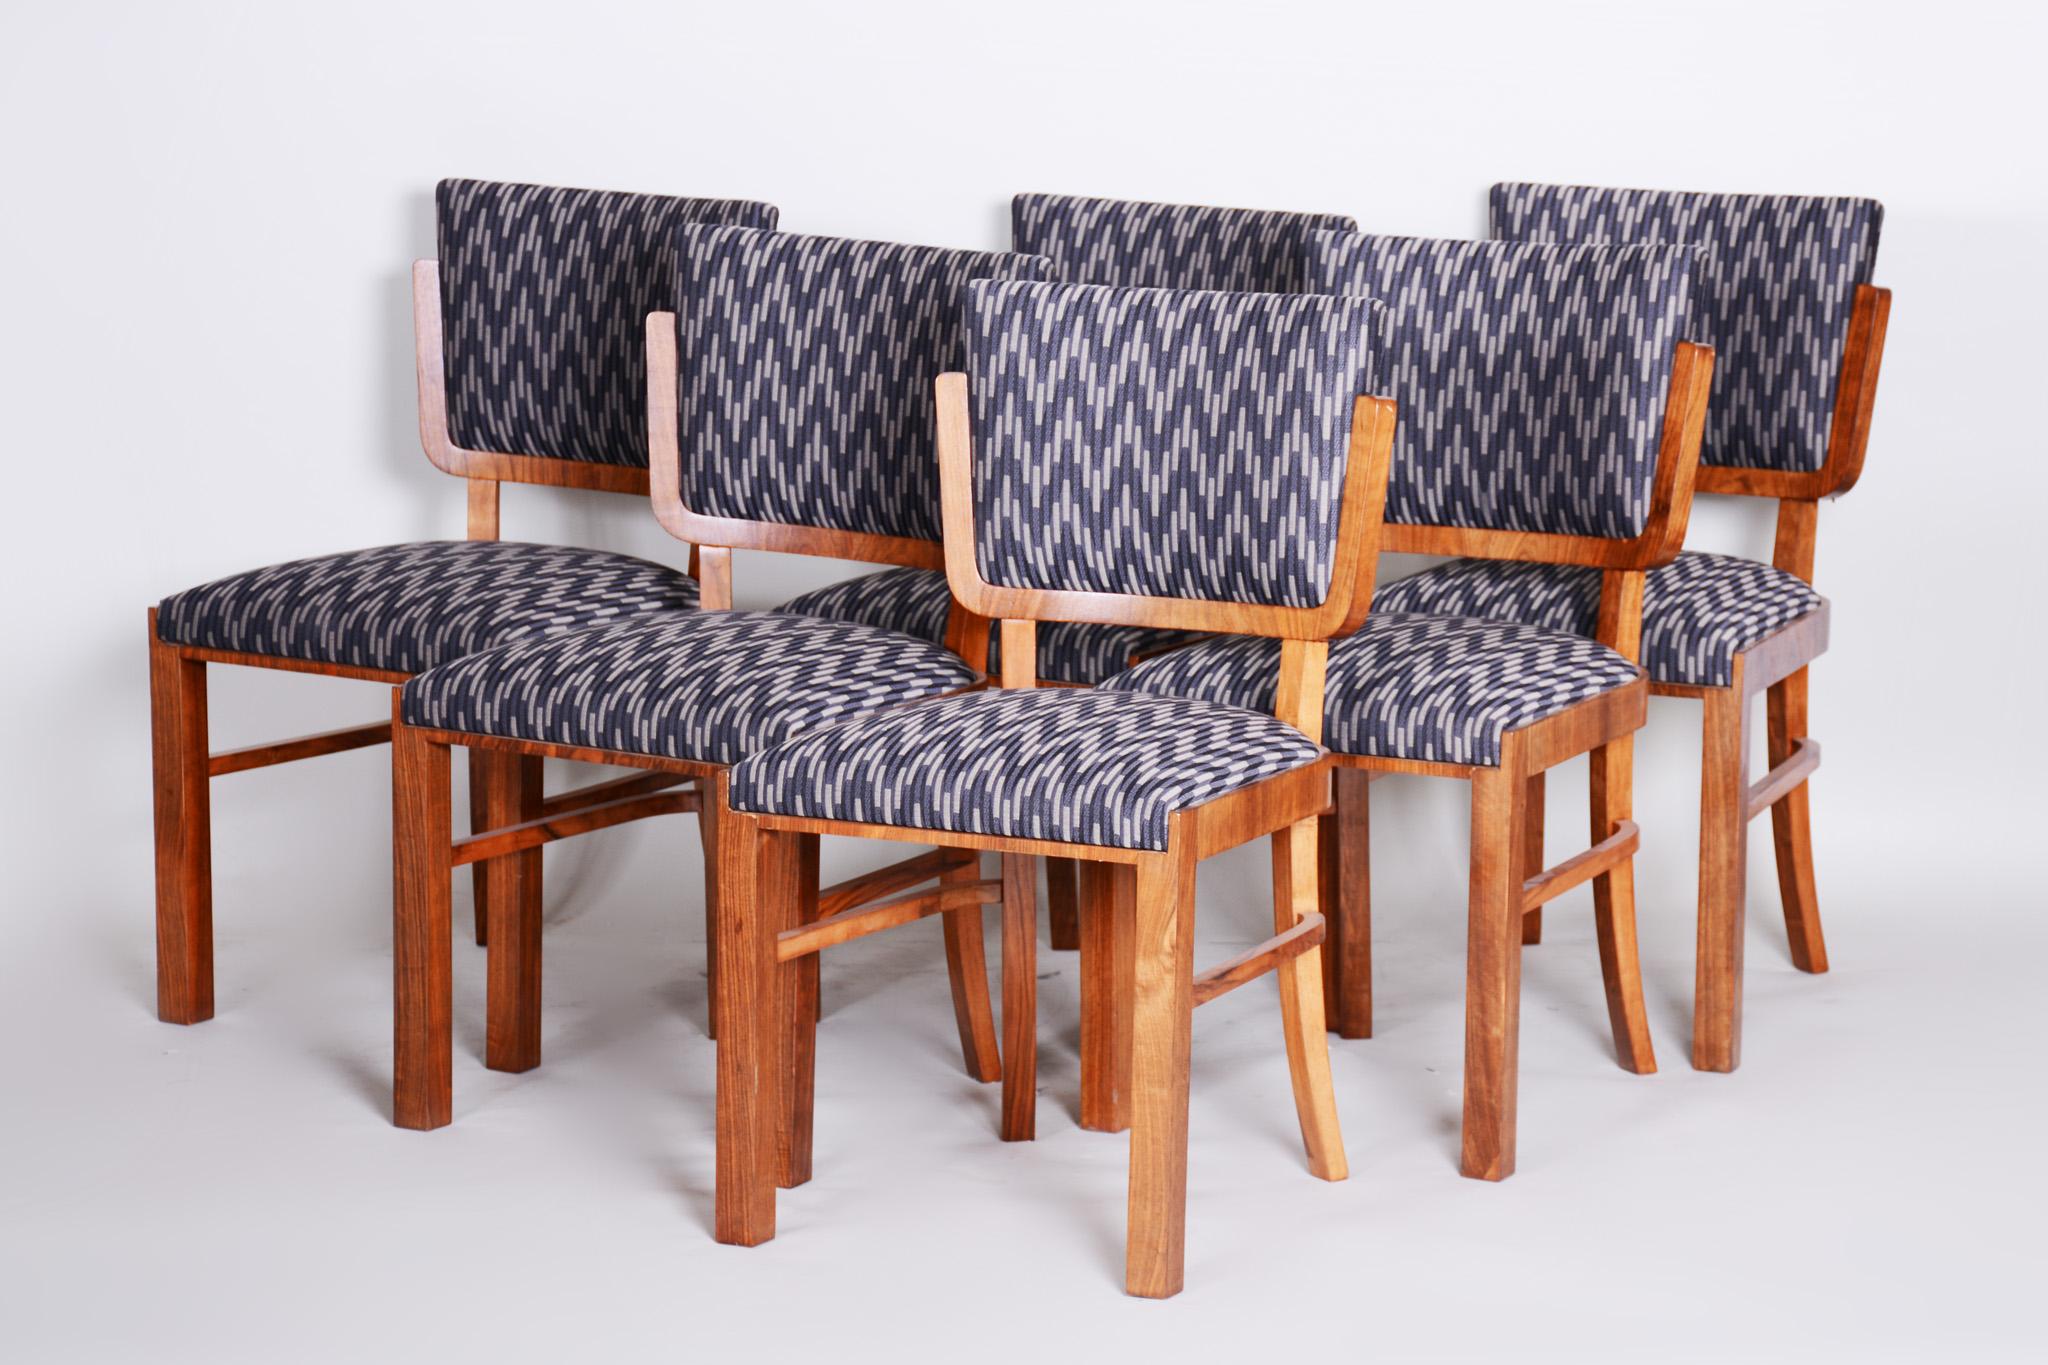 French Set of Restored Art Deco Walnut Chairs, 6 Pieces, France, New Upholstery, 1930s